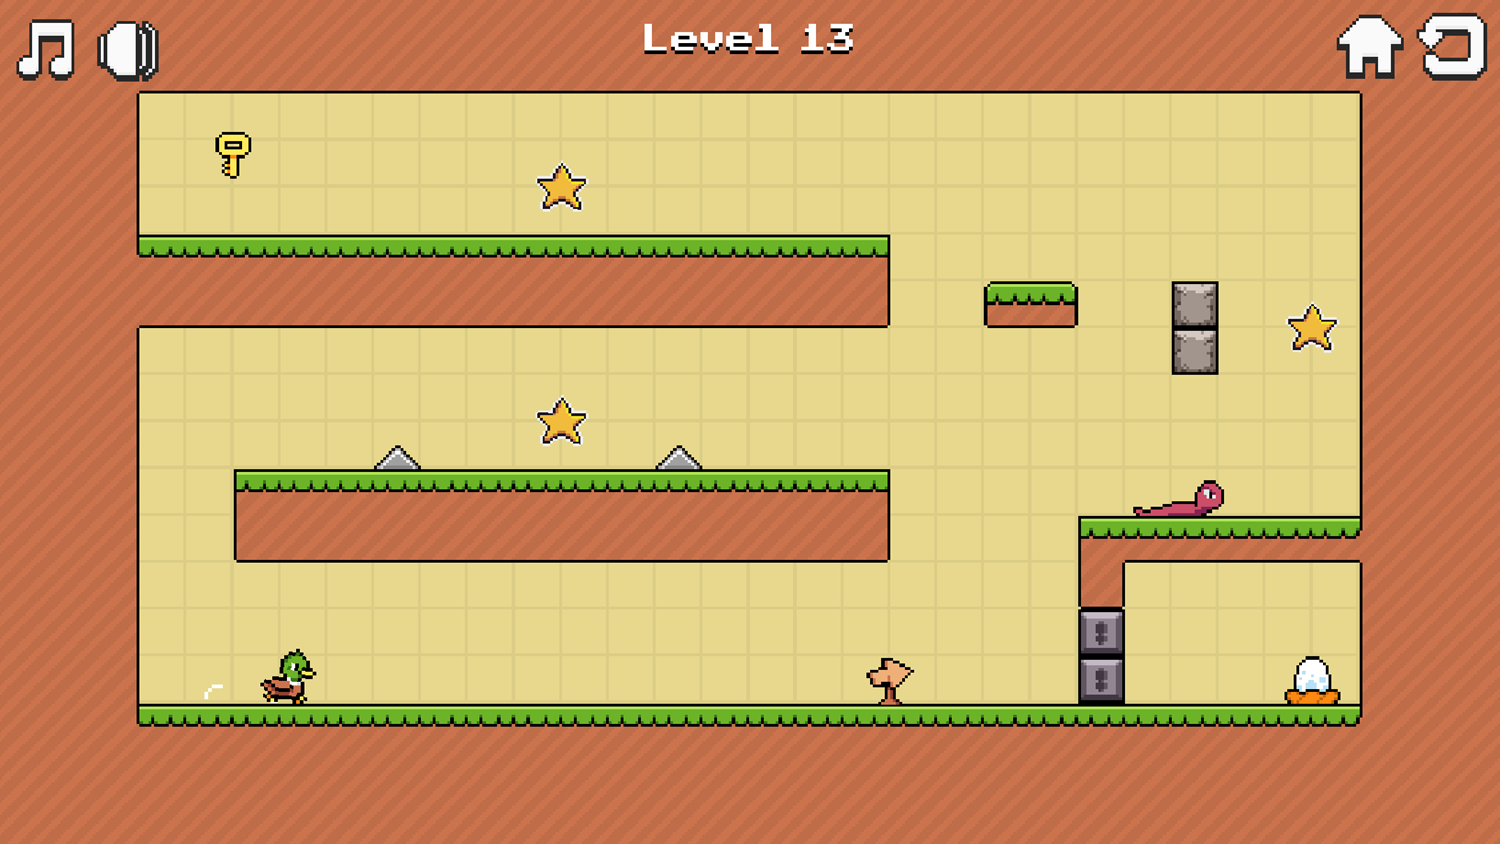 Duck Auto Run Game Level With a Key Screenshot.